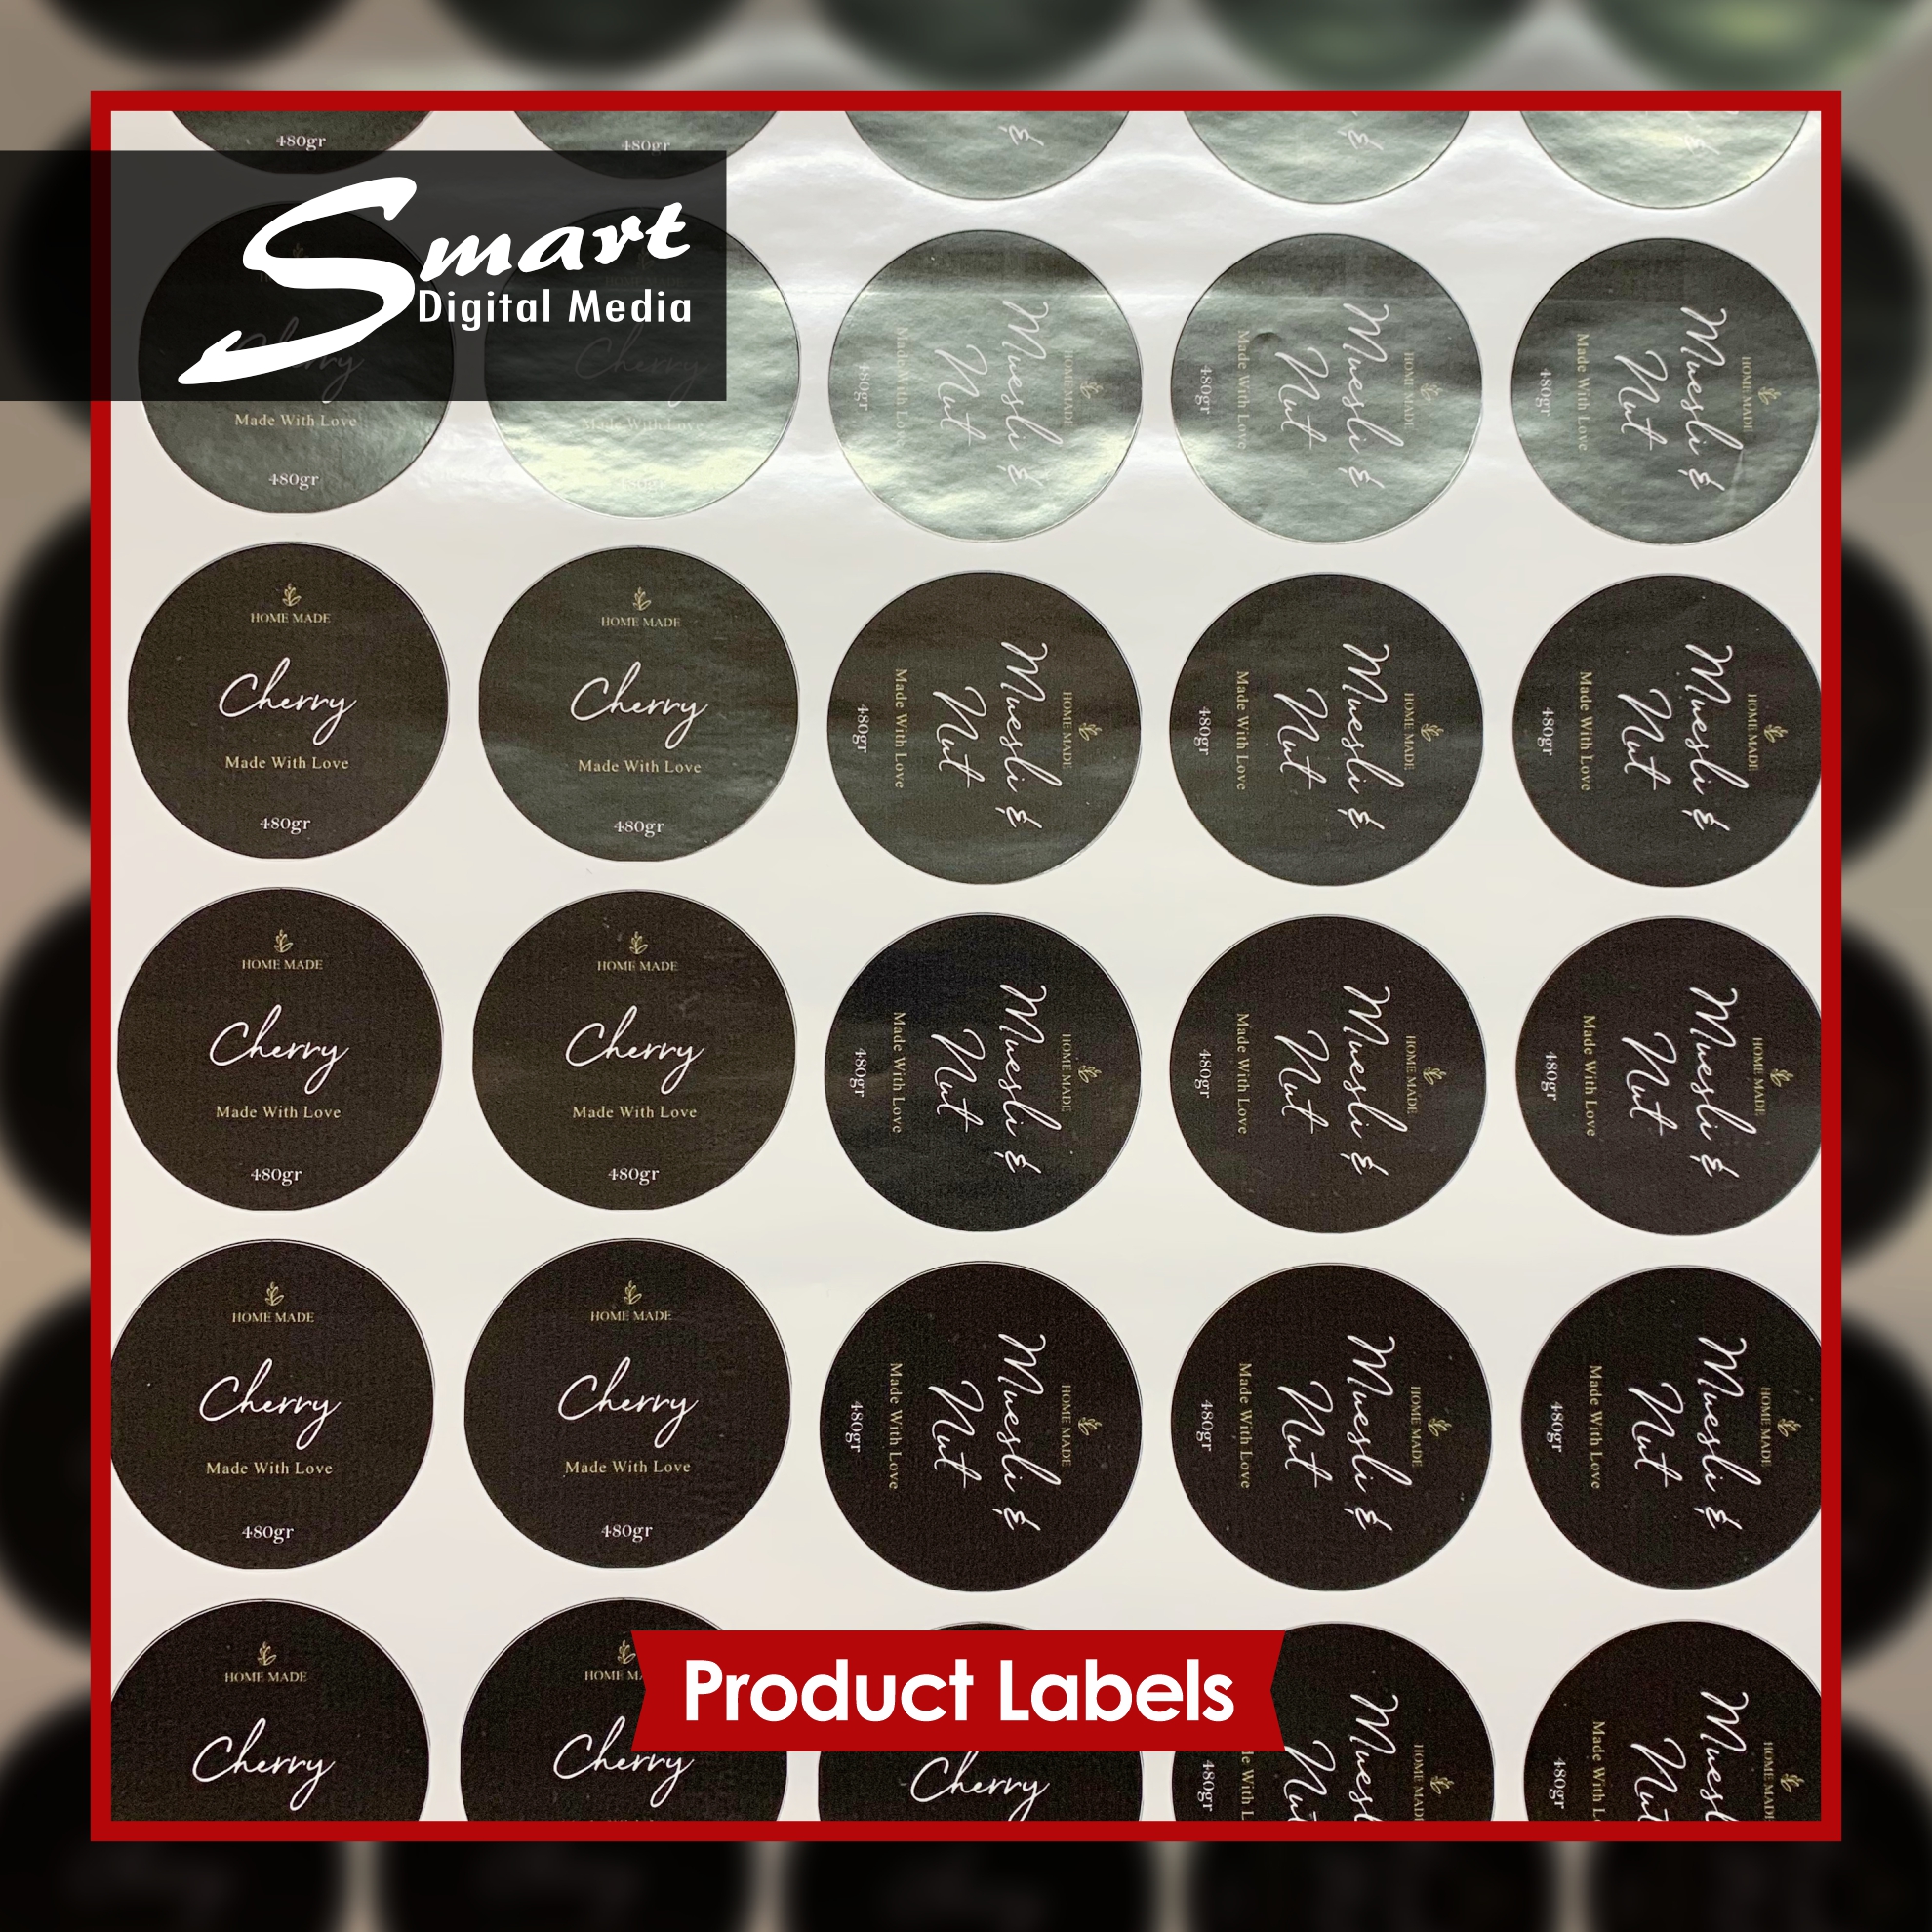 Vinyl sheet with rows of round black product sticker labels.